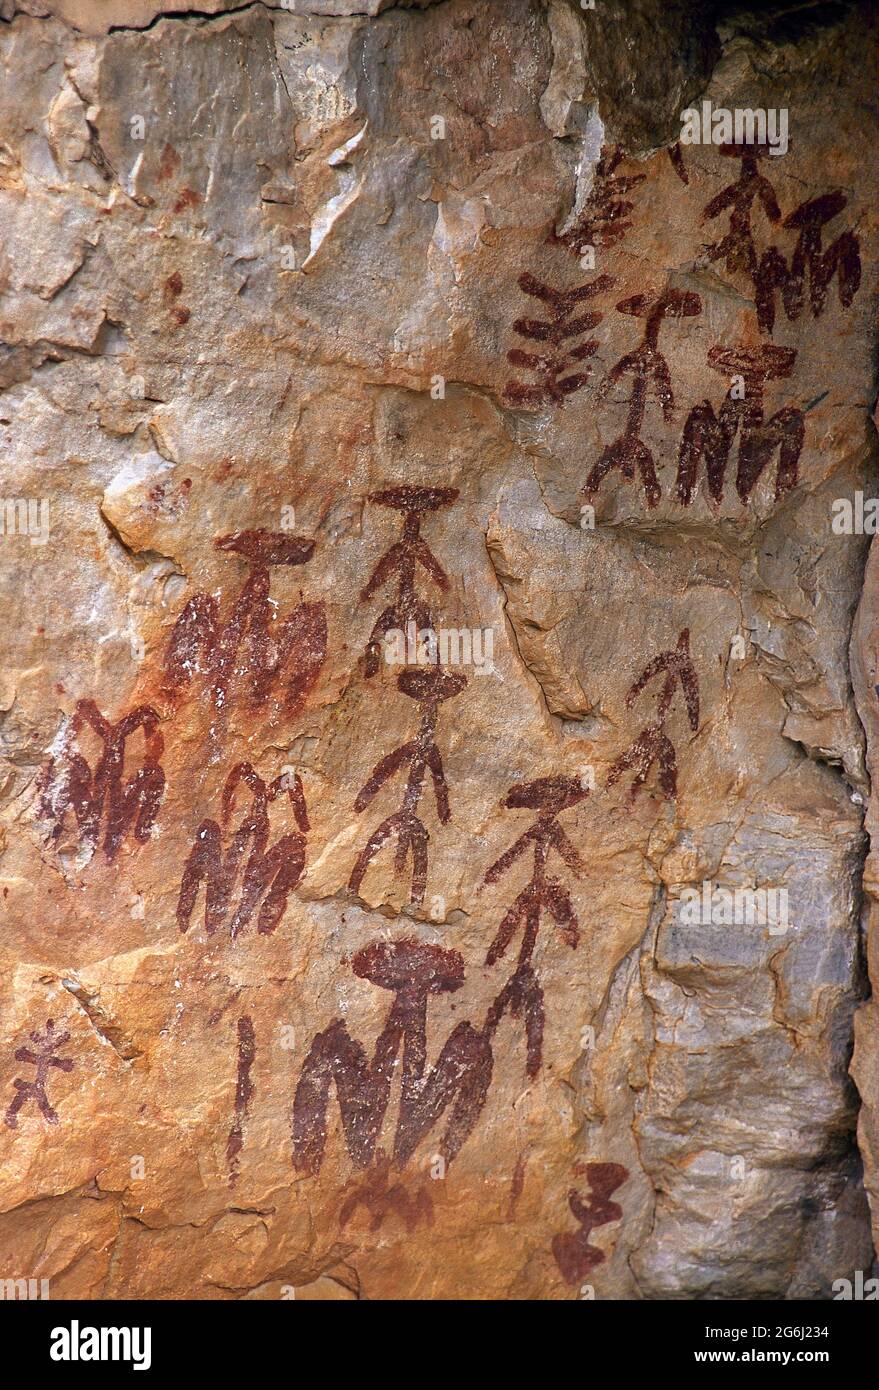 Spain, Castile-La Mancha, Ciudad Real province, Fuencaliente. Peña Escrita prehistoric Cave. Prehistory. Neolithic (from the 3rd millennium BC to the Late Bronze Age). Schematic cave paintings with symbols, some human figures and scenes of a ritual dance. They were discovered in 1783. Stock Photo